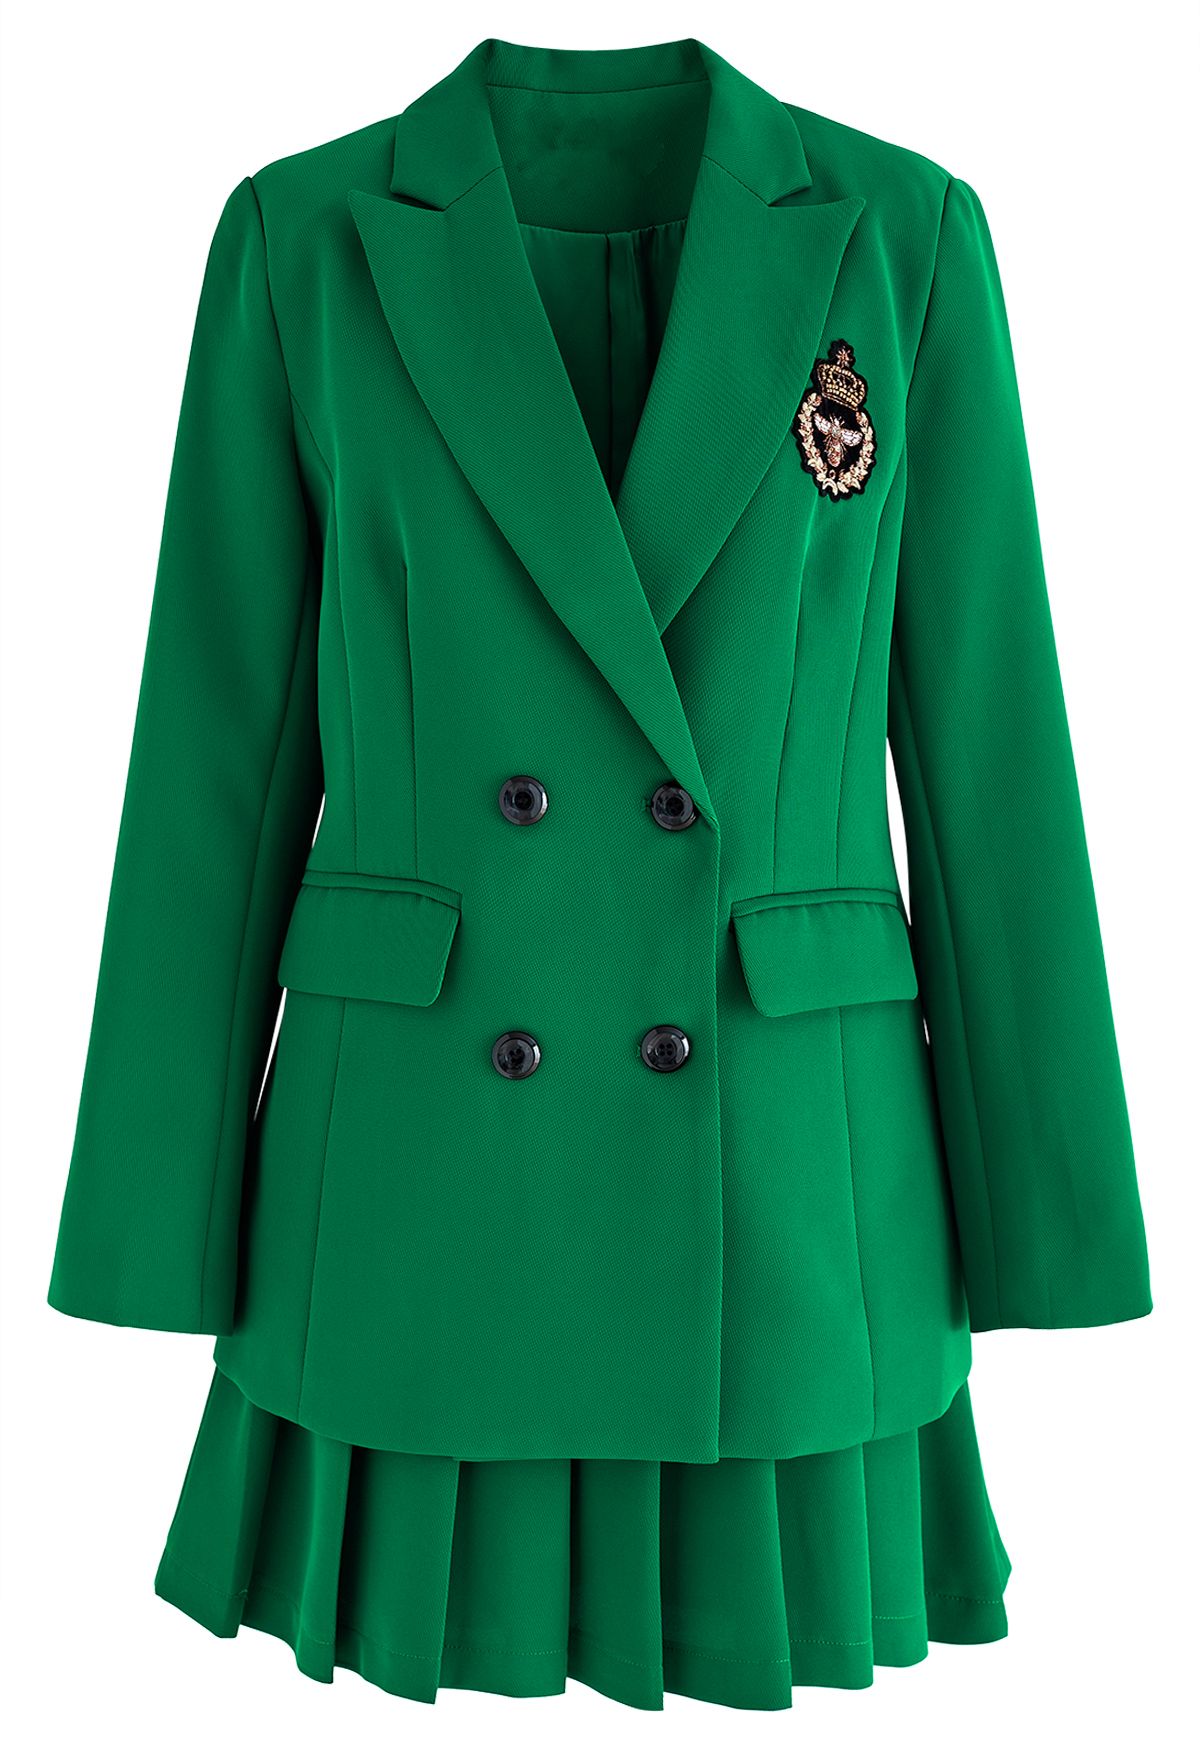 Bee Badge Solid Color Blazer and Skirt Set in Green